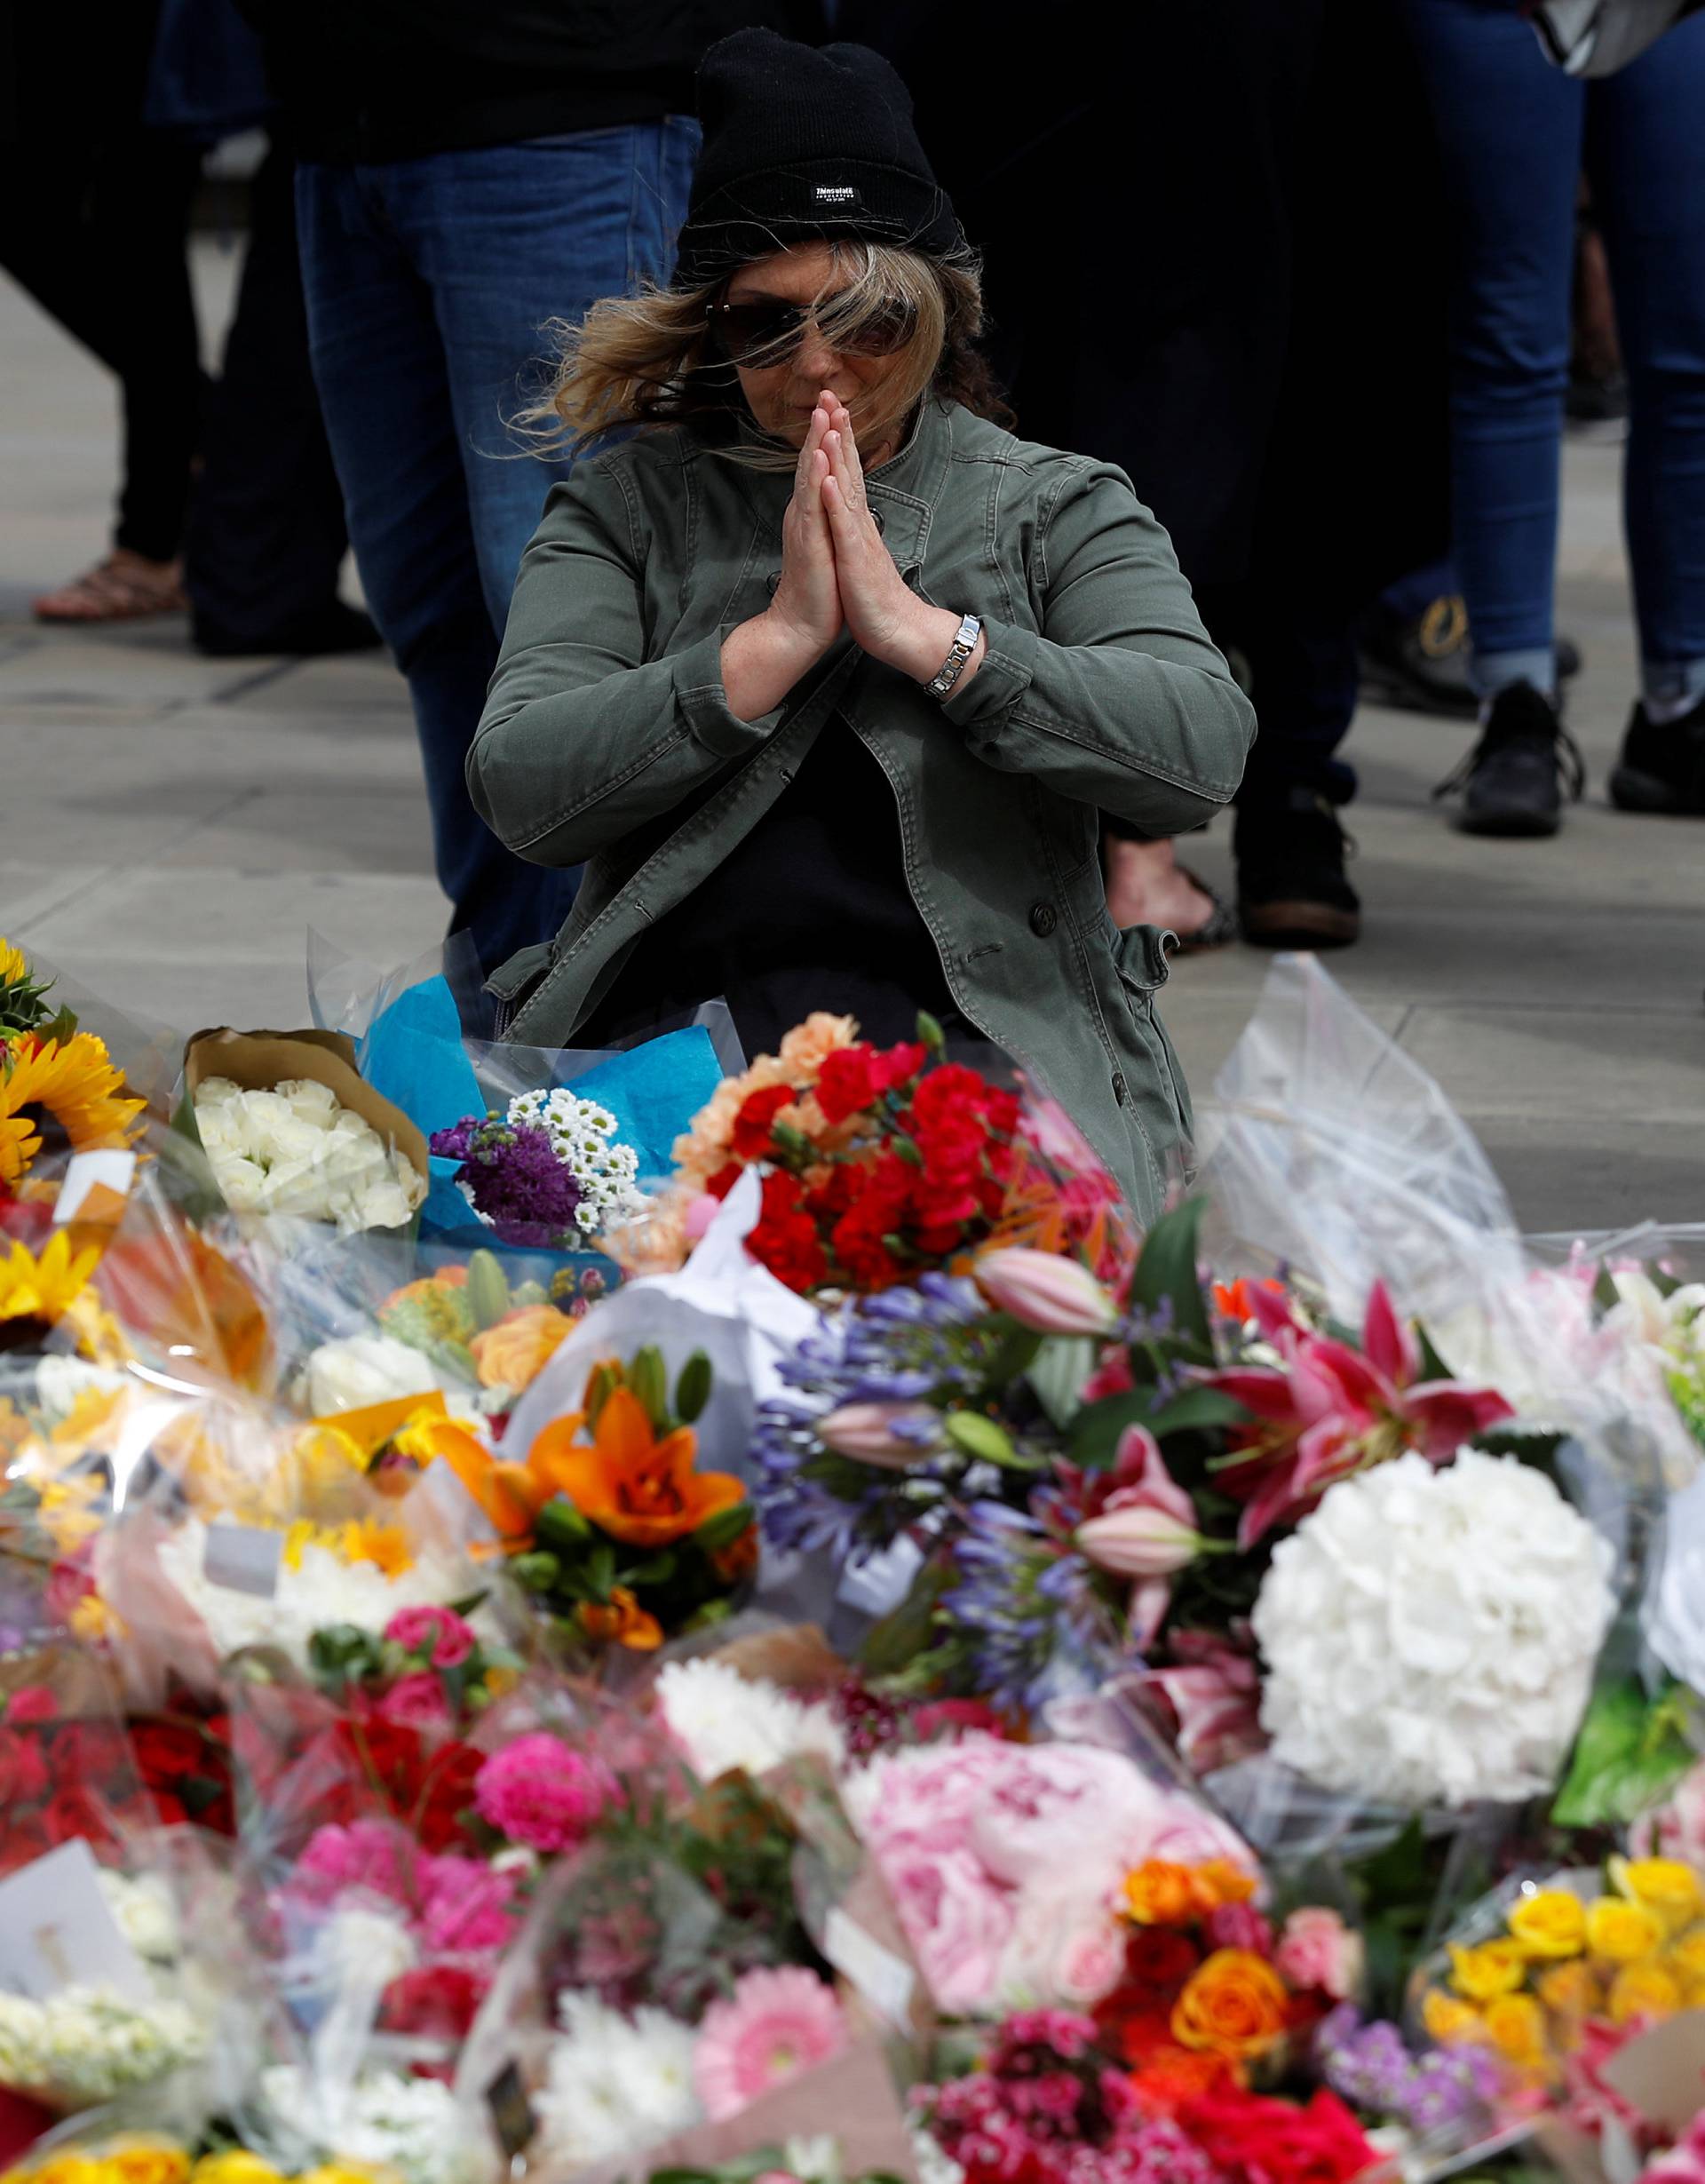 A woman sits in front of floral tributes on the south side of London Bridge near Borough Market after an attack left 7 people dead and dozens of injured in London